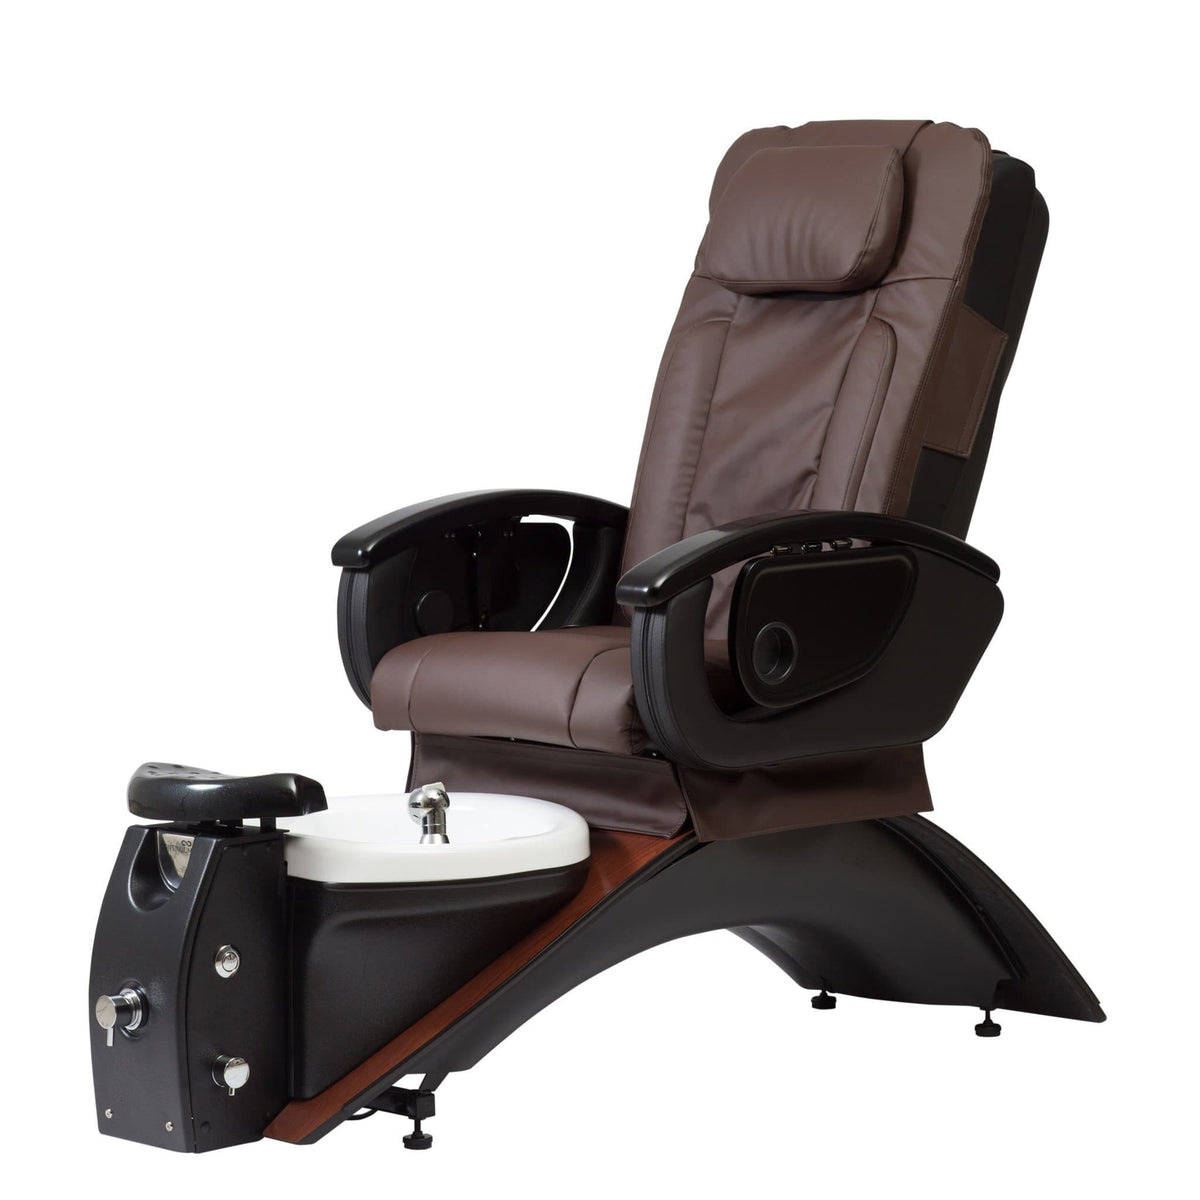 Continuum Continuum Vantage VE Pedicure Spa Chair Pedicure &amp; Spa Chairs - ChairsThatGive